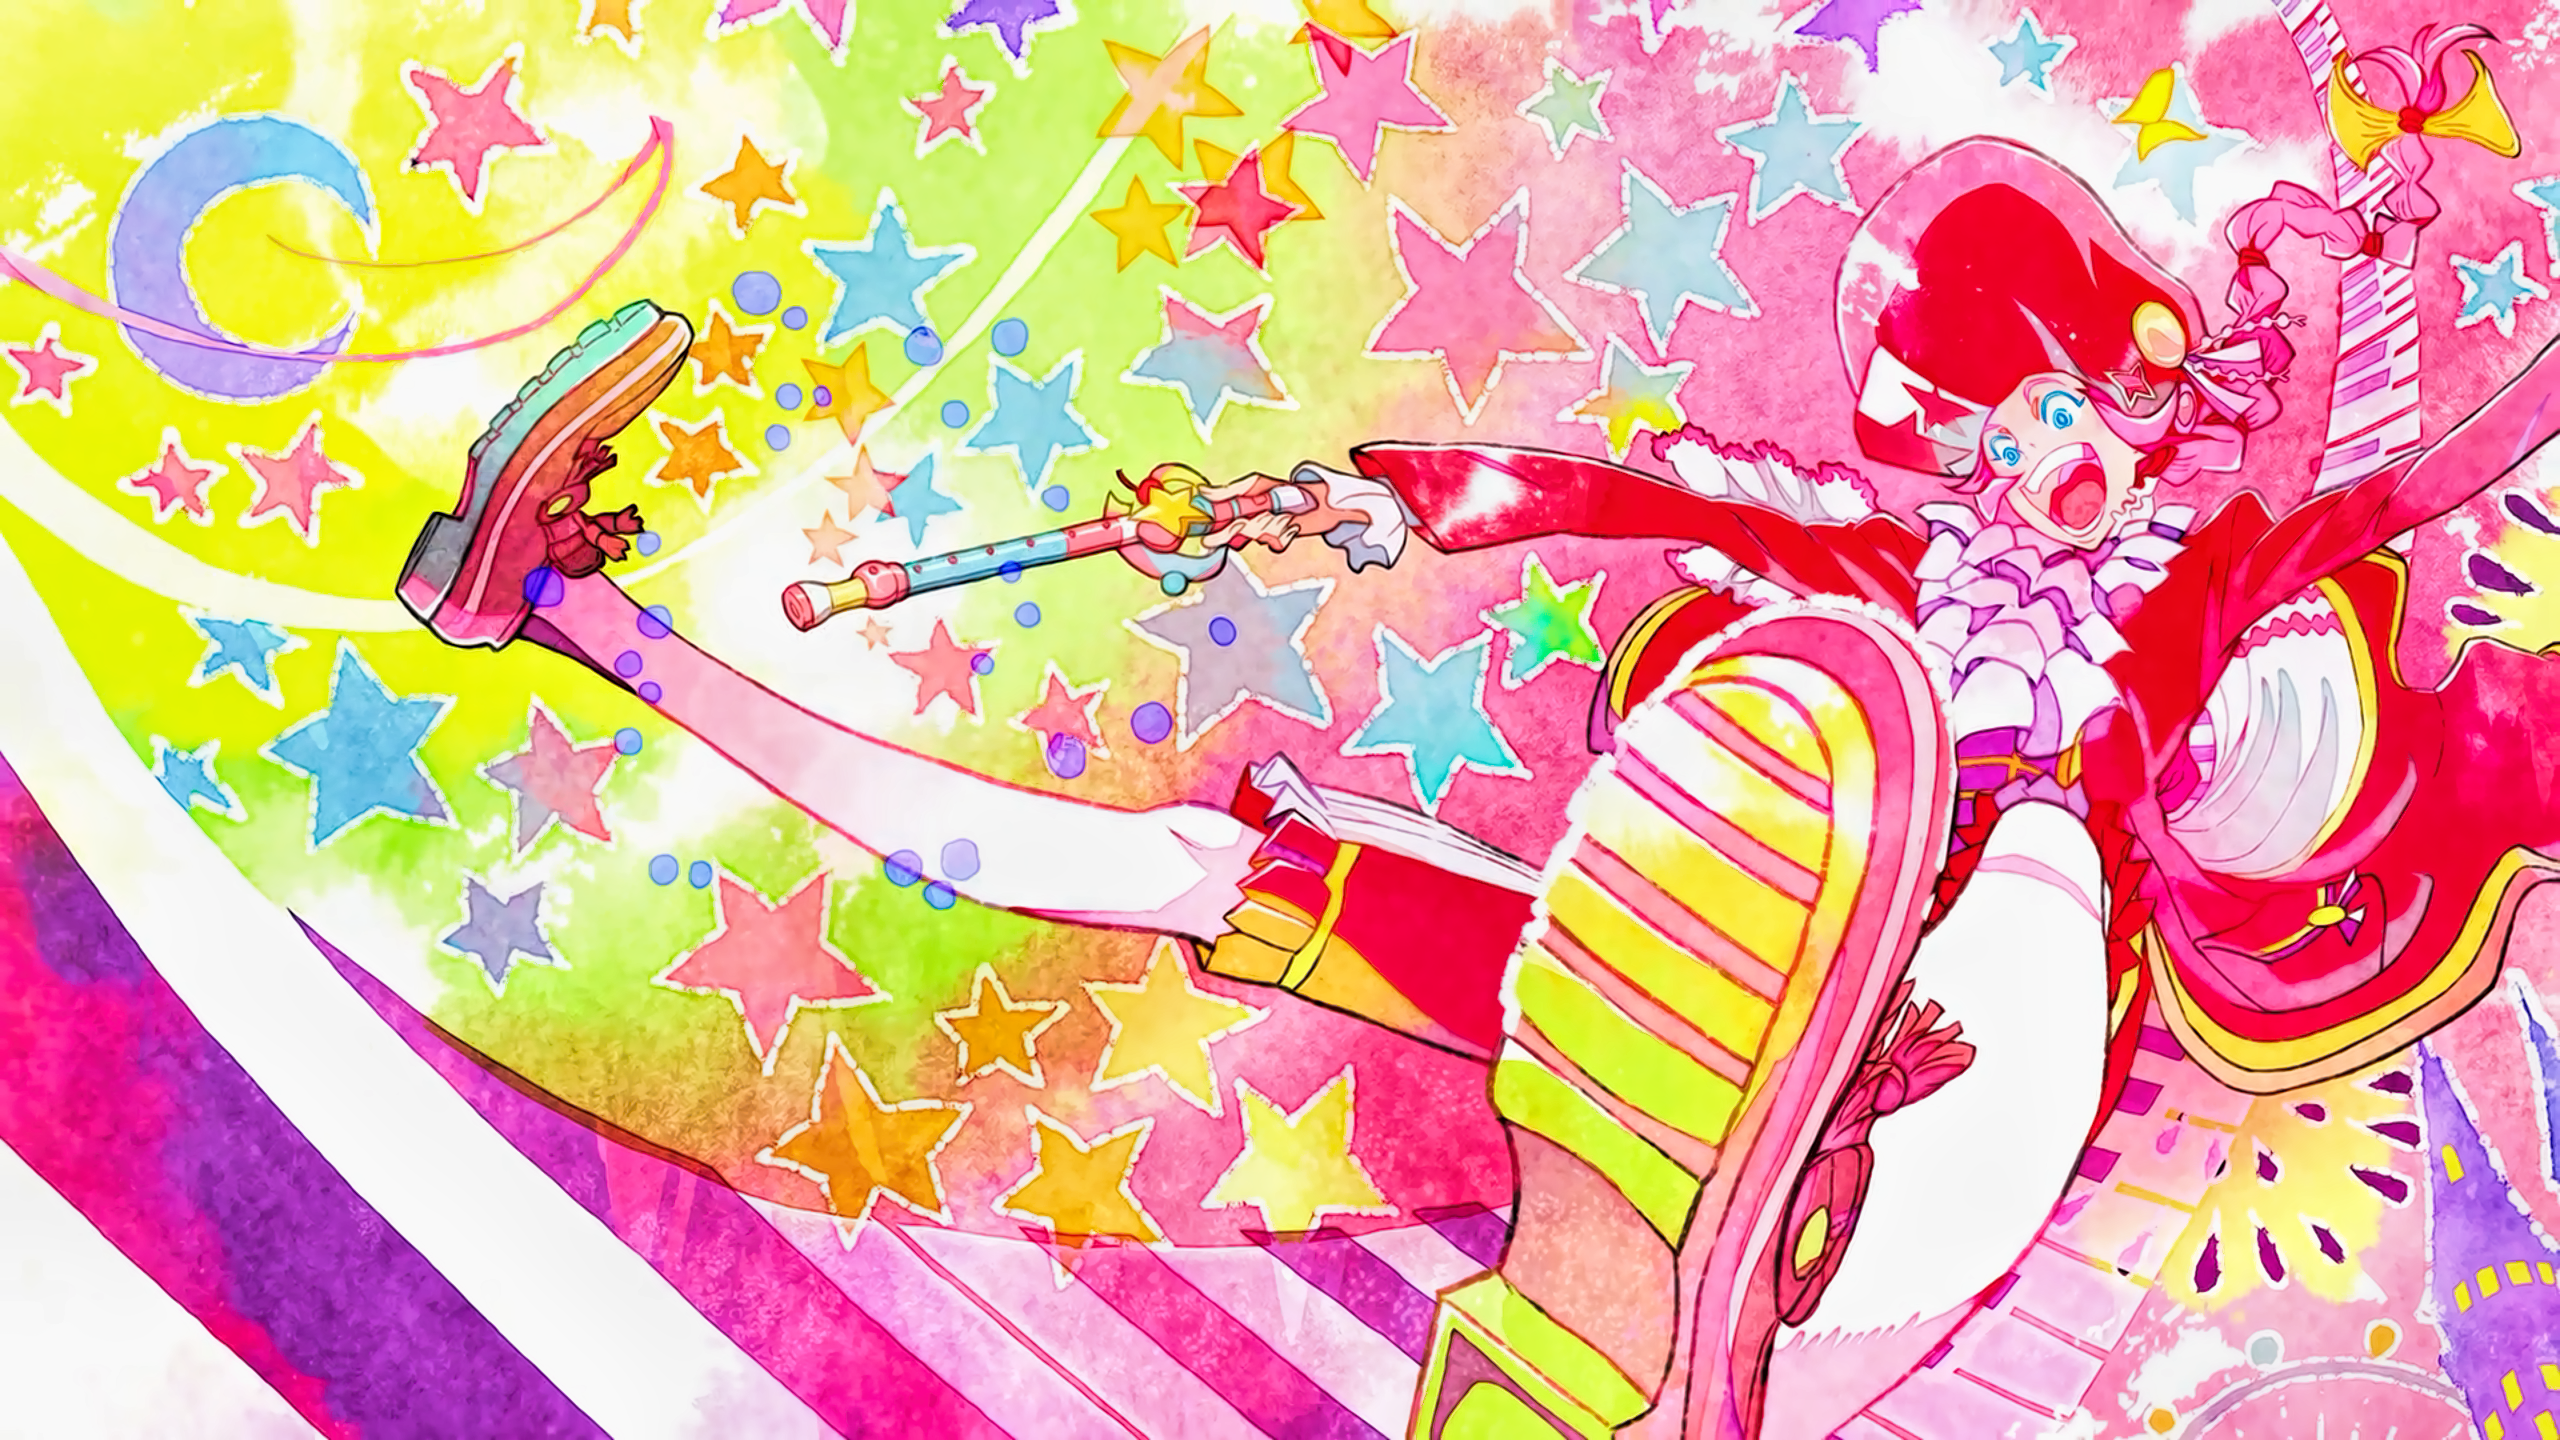 Anime 2560x1440 ClassicaLoid musician anime open mouth colorful